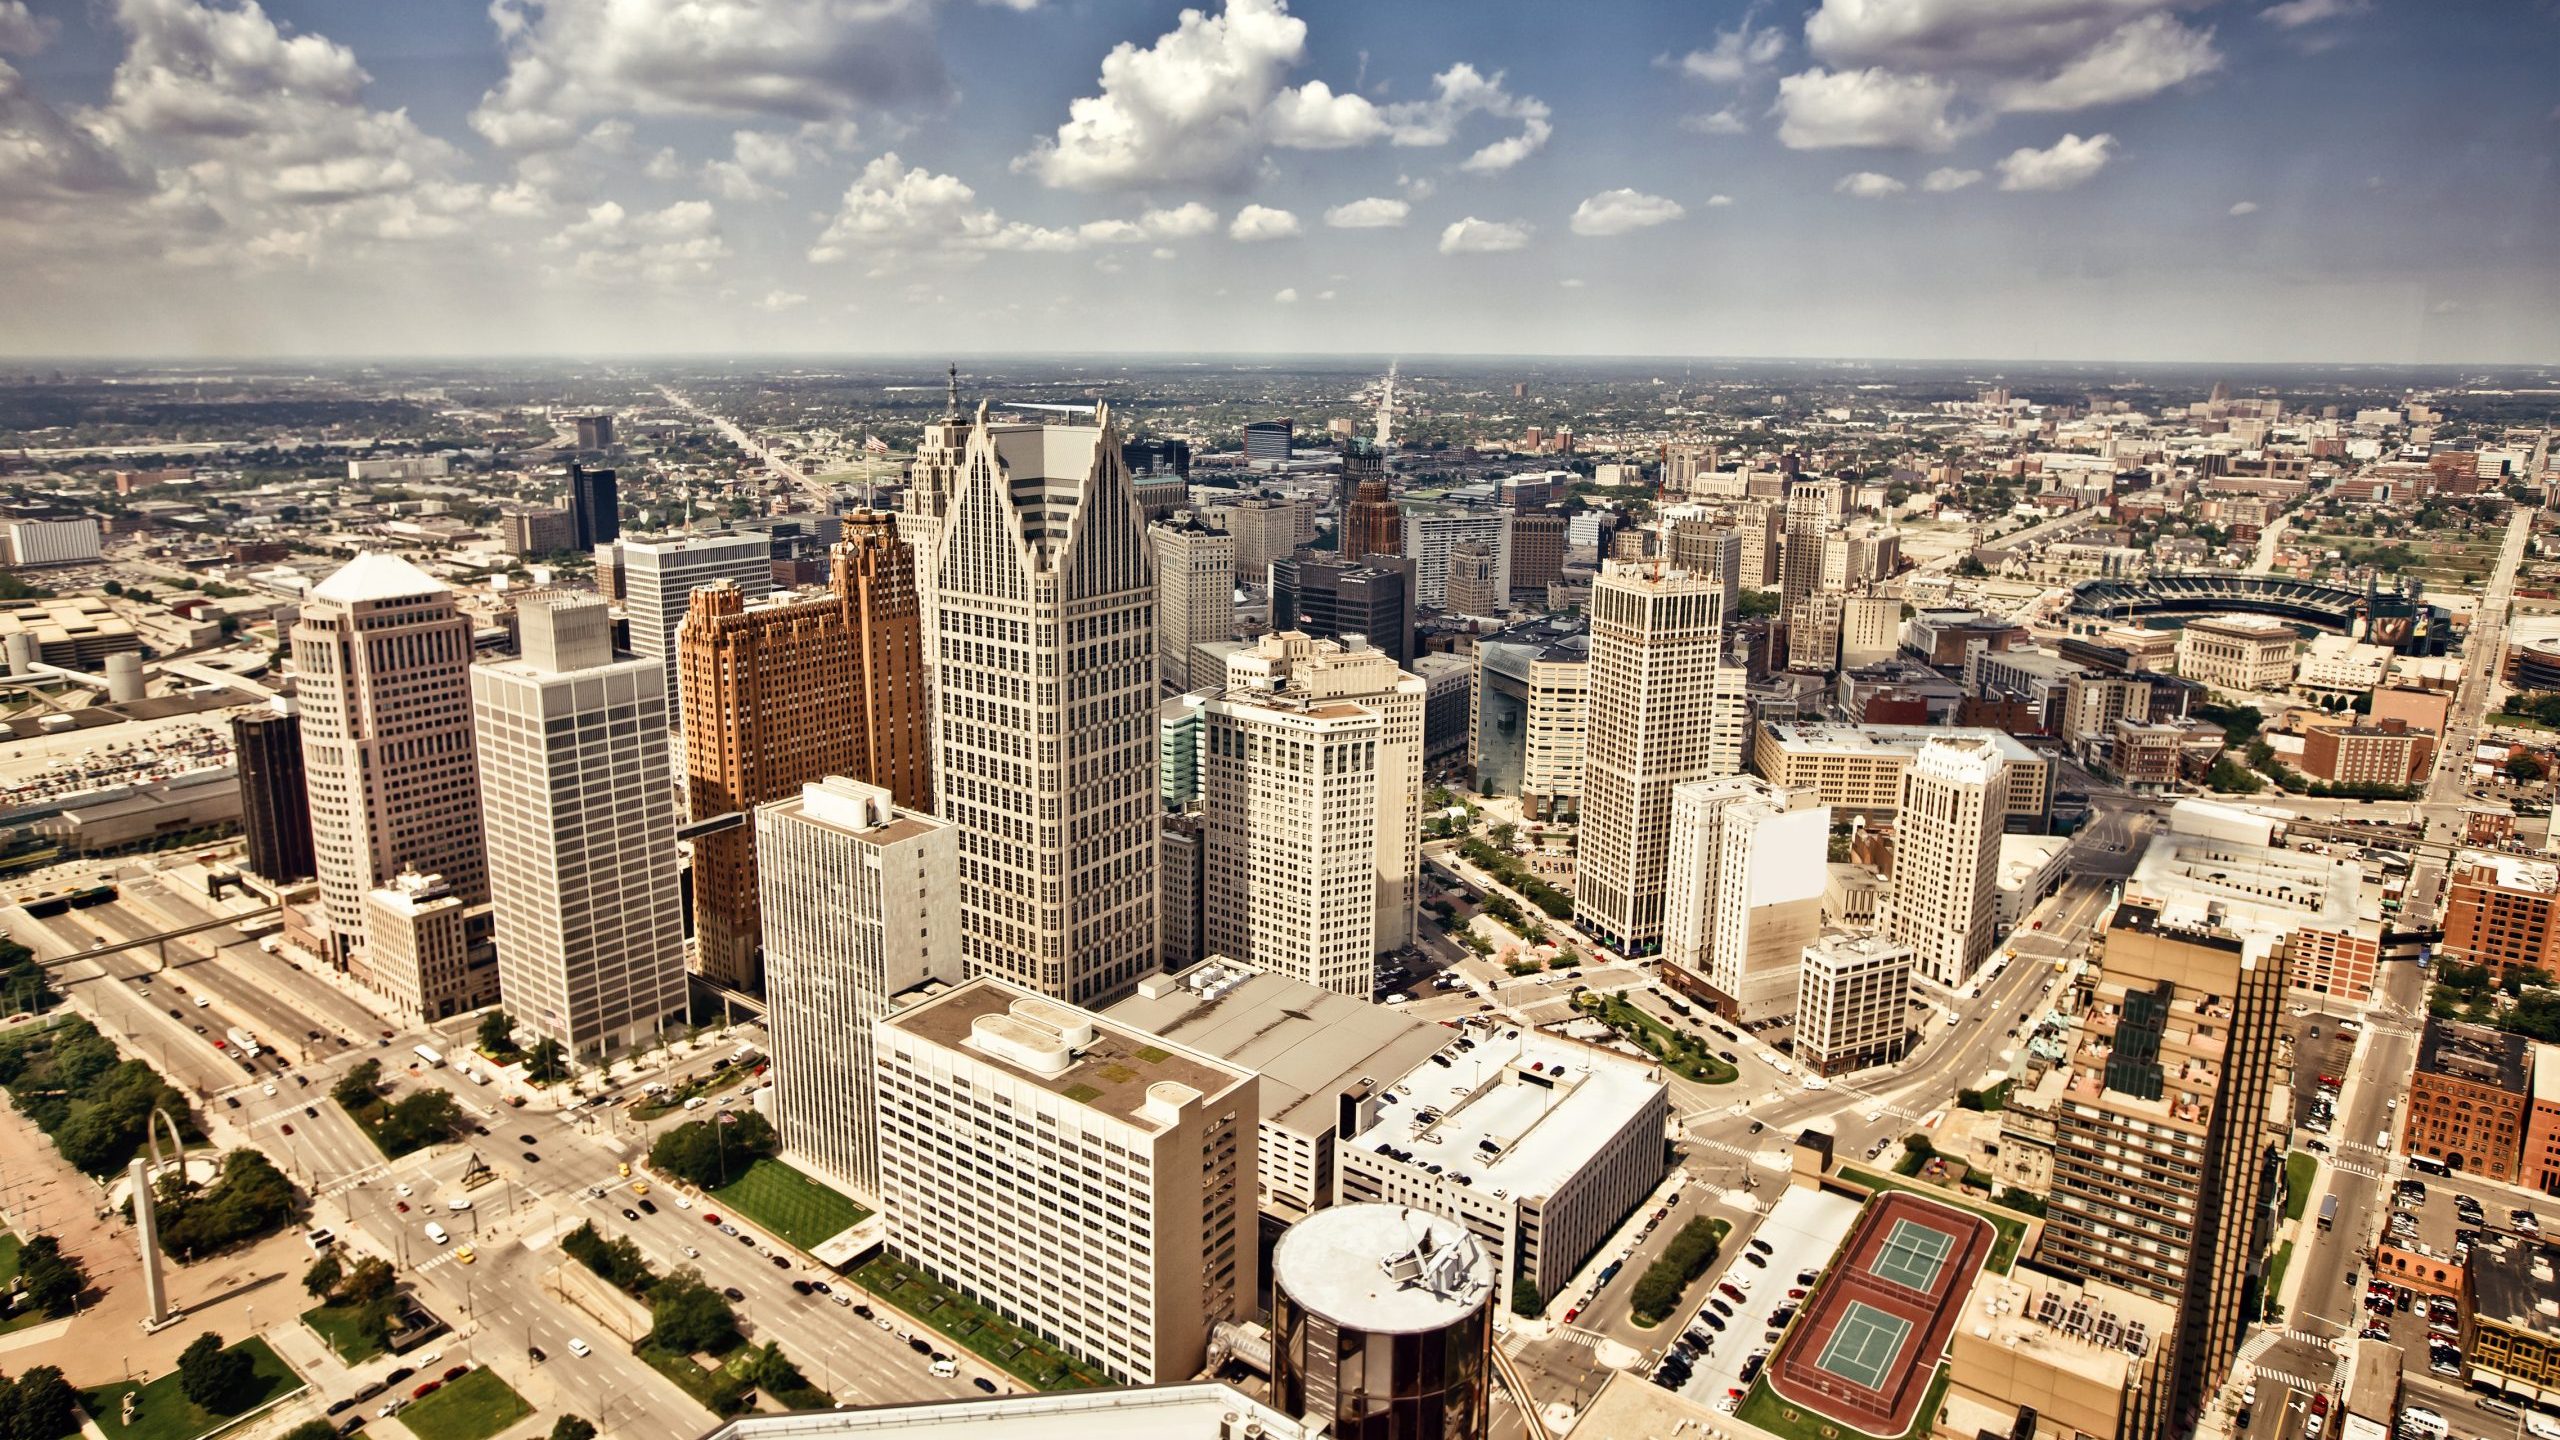 Detroit Evening Report: Unemployment rate in Detroit matches 20 year